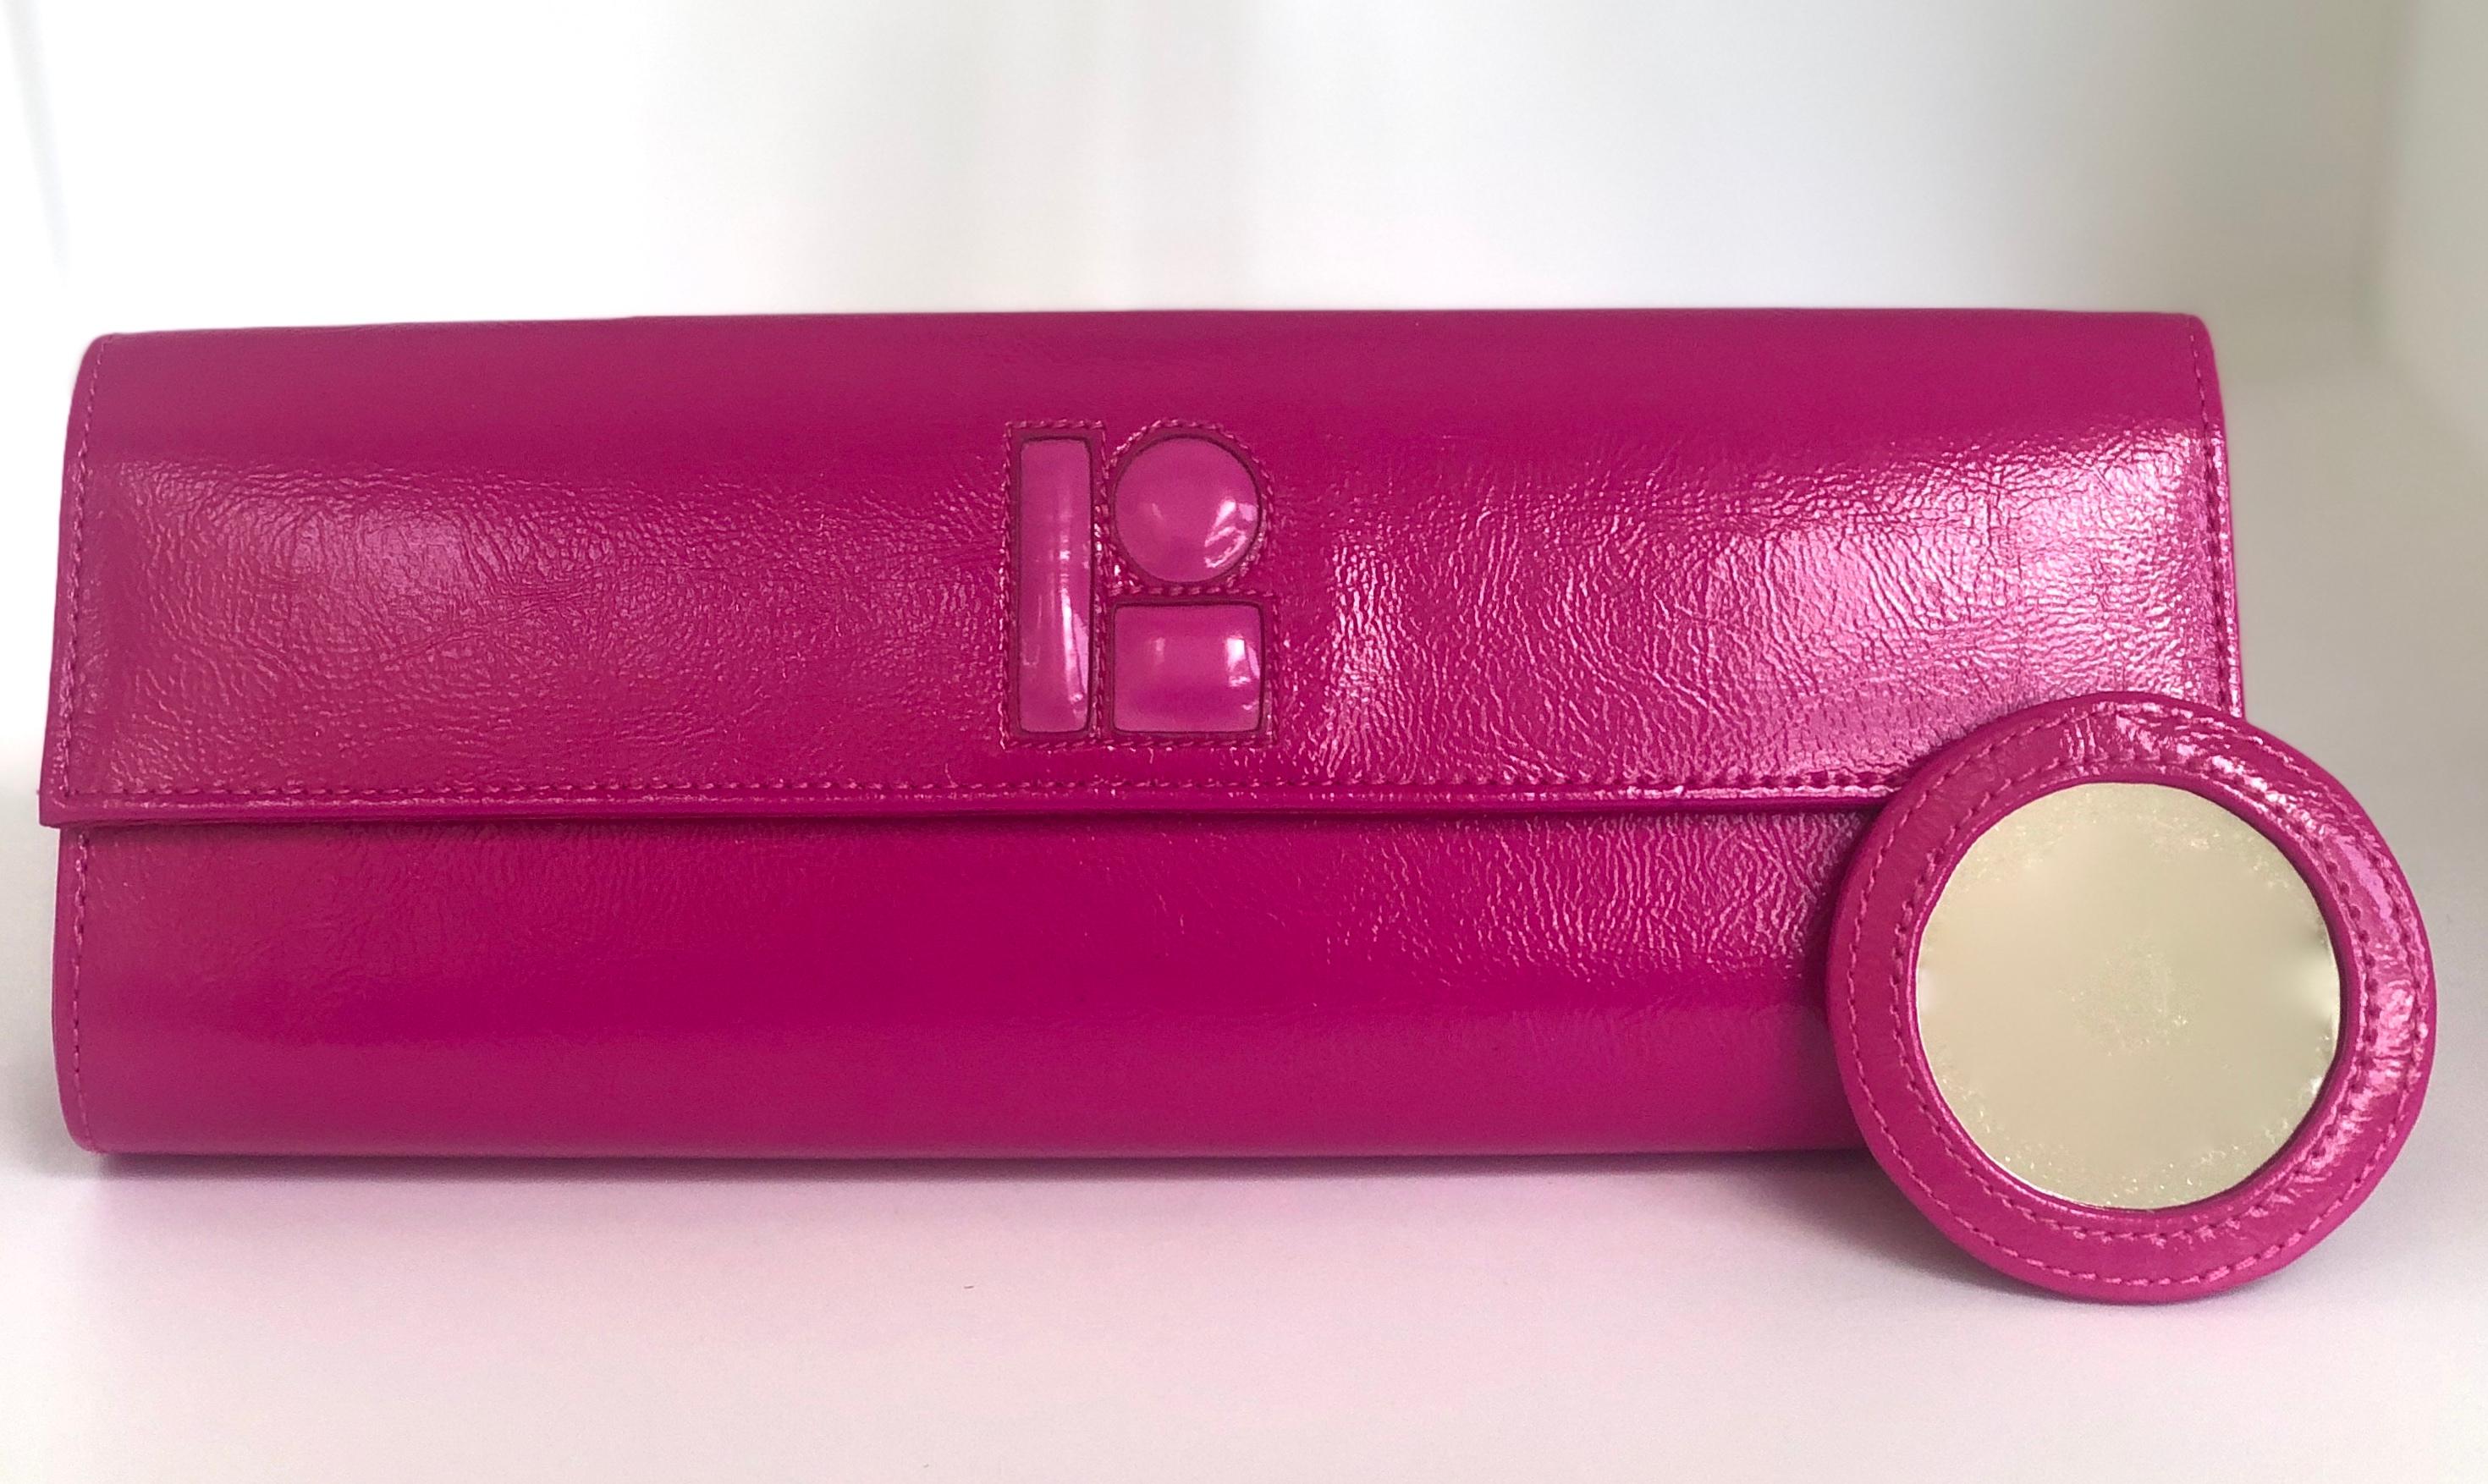 Offered is a signed Lisa Perry fuchsia pink patent leather clutch with magnetic closure and matching removable compact fuchsia patent leather backed compact mirror.  Lisa Perry is the wife of the hedge fund guru and former owner of Barney's New